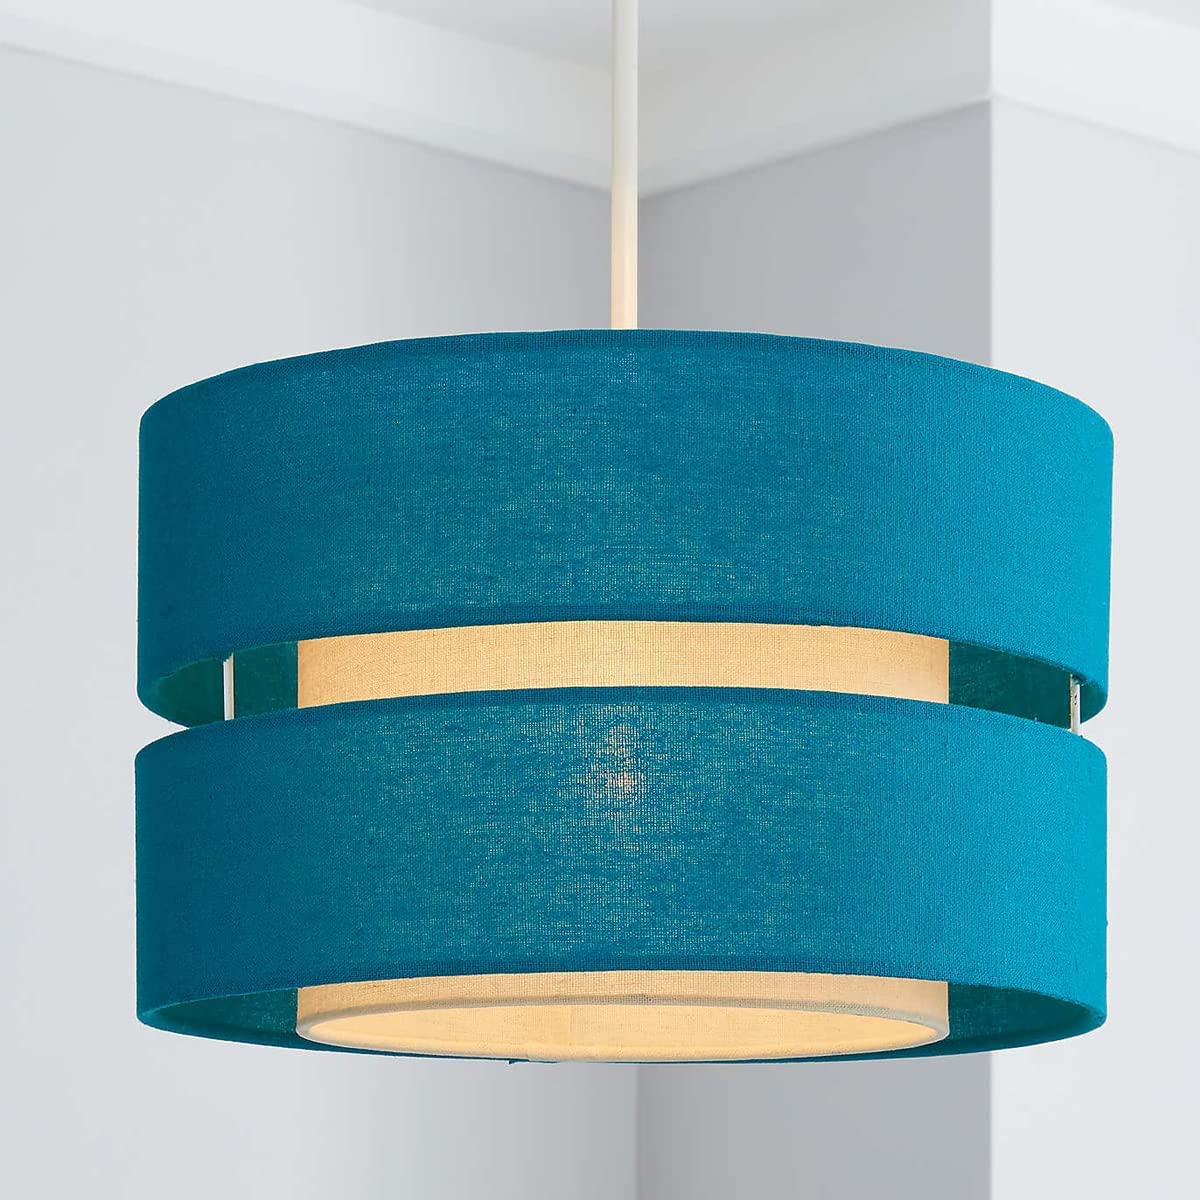 Our Gayle two tiered luxury fabric double layered shade is contemporary in its appearance and we have designed the shade to suit a range of interiors. Easy to fit simply attached to an existing pendant flitting.  It is crafted from high quality fabric material in two layers and complimented with a white inner which looks beautiful when light shines through. The shade has been made to fit both a ceiling light or lamp base.